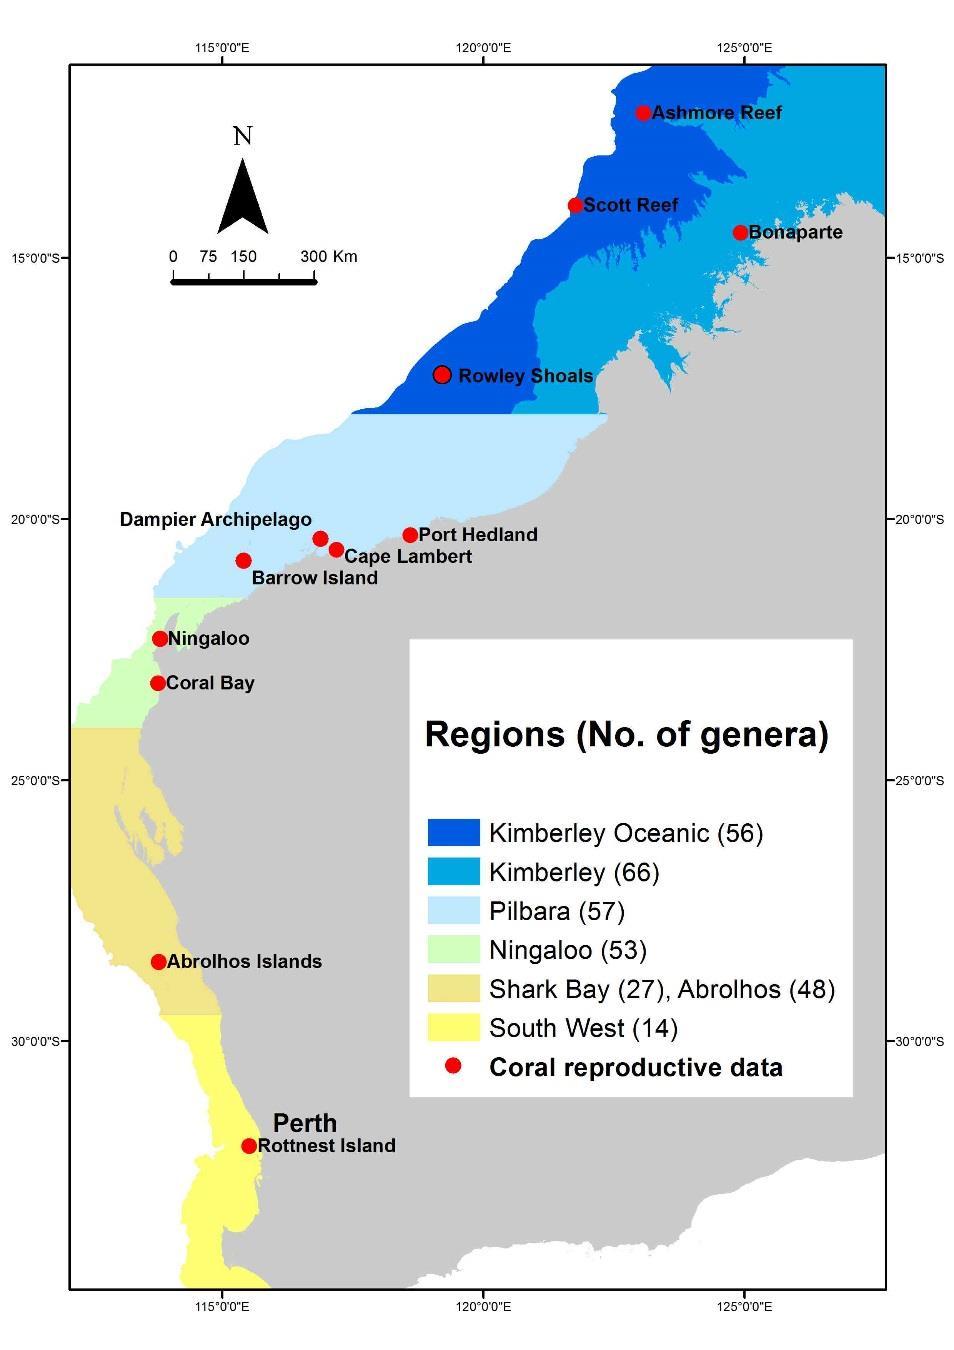 Figure 1. Regions in which the composition of coral reefs and the proposed patterns of coral reproduction differ most significantly across Western Australia.